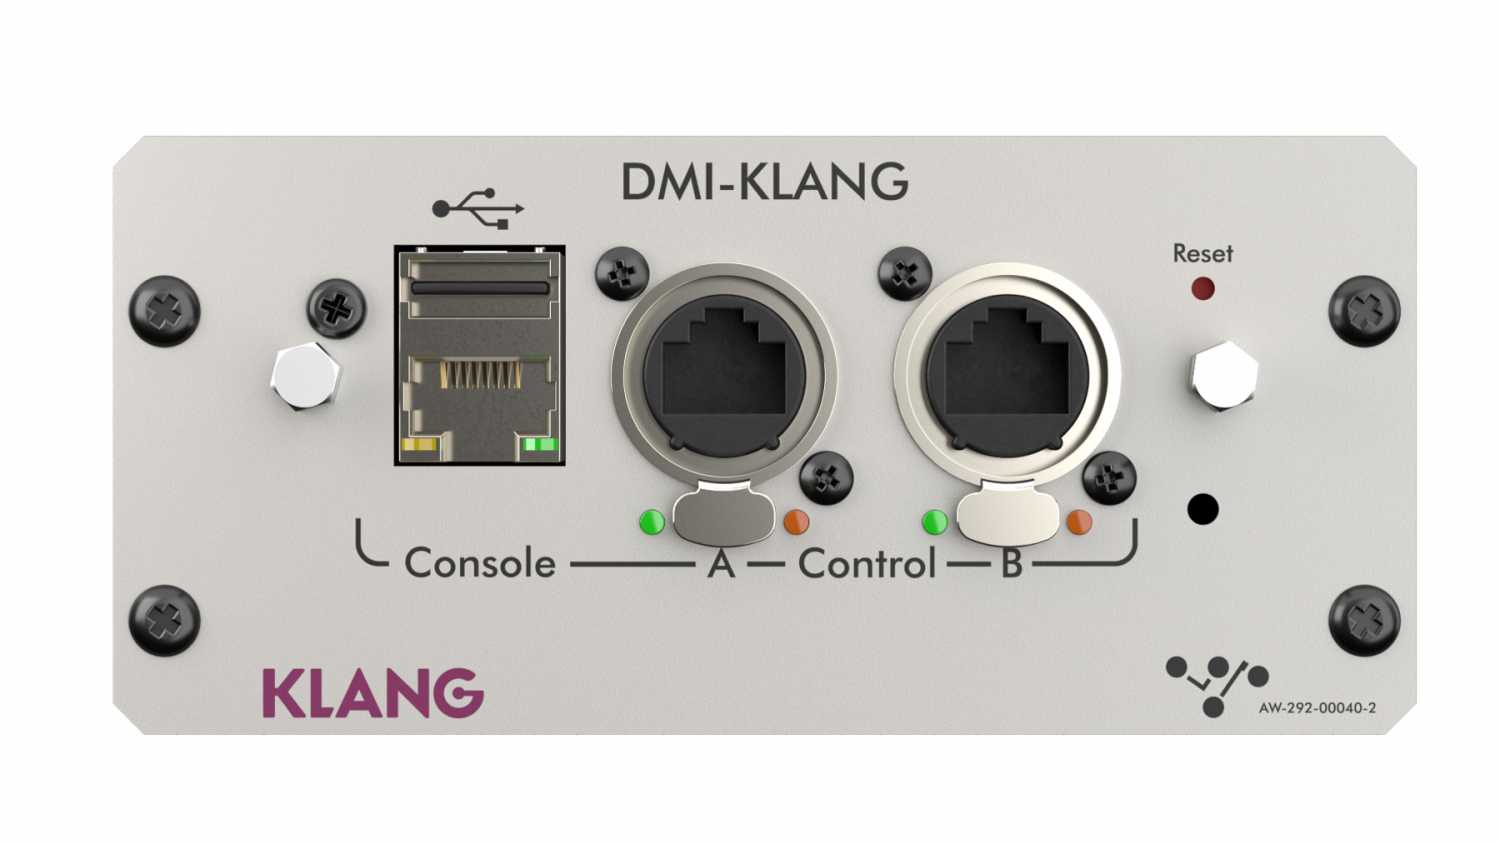 The DMI-KLANG connects directly to DiGiCo consoles’ internal audio stream